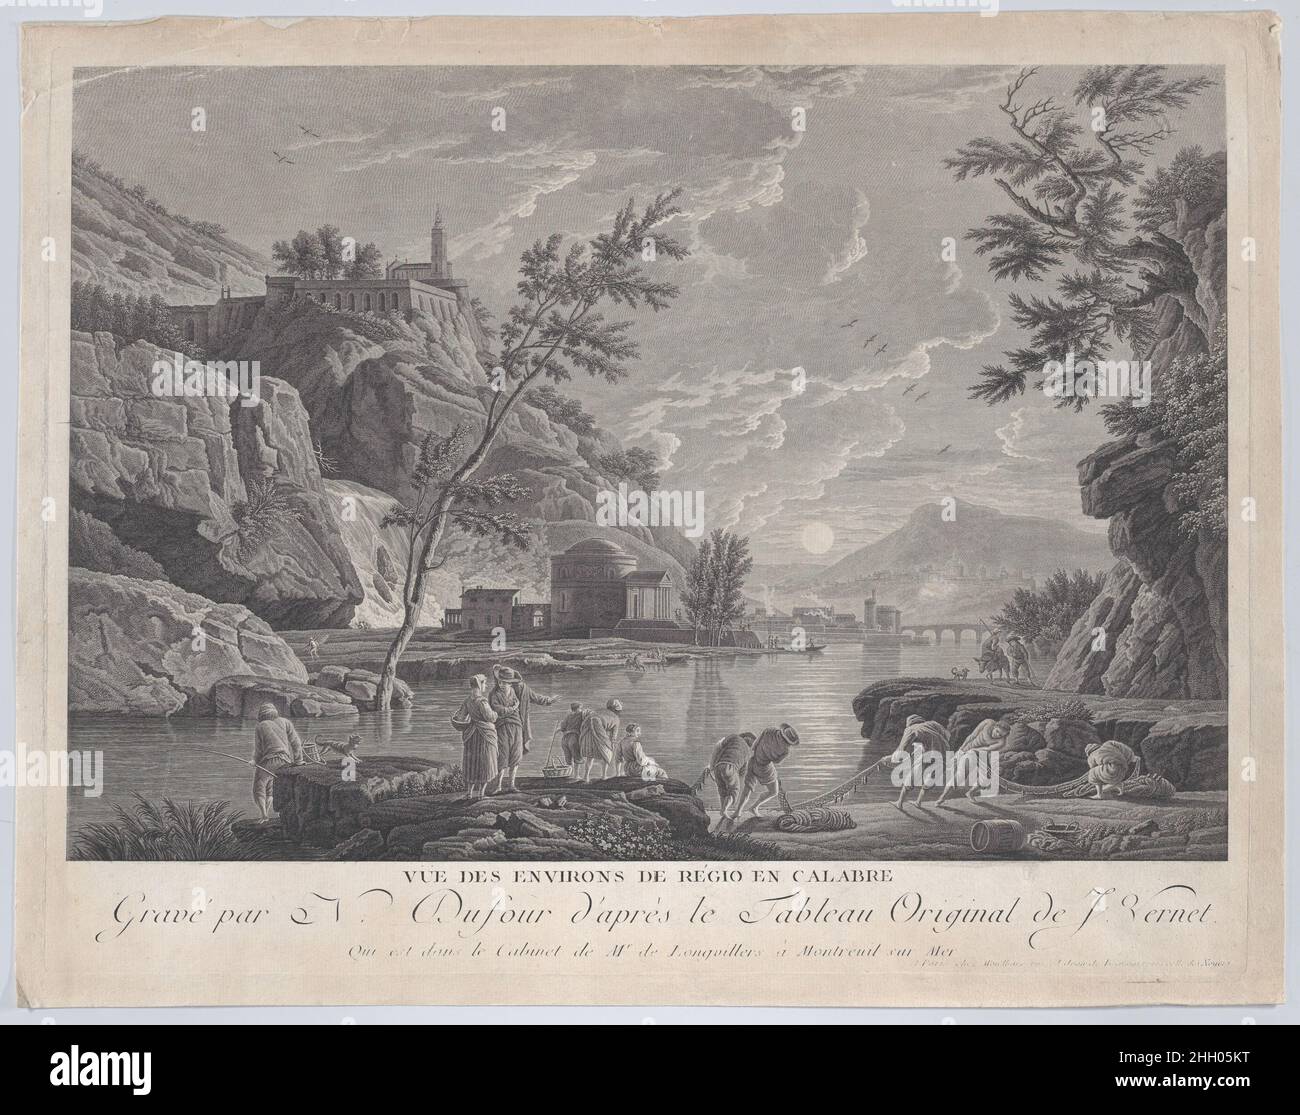 View of the Surroundings of Regio in Calabria ca. 1770 After Joseph Vernet. View of the Surroundings of Regio in Calabria. After Joseph Vernet (French, Avignon 1714–1789 Paris). ca. 1770. Engraving. Charles Nicolas Dufour (French, born Abbeville 1724–1818). Prints Stock Photo